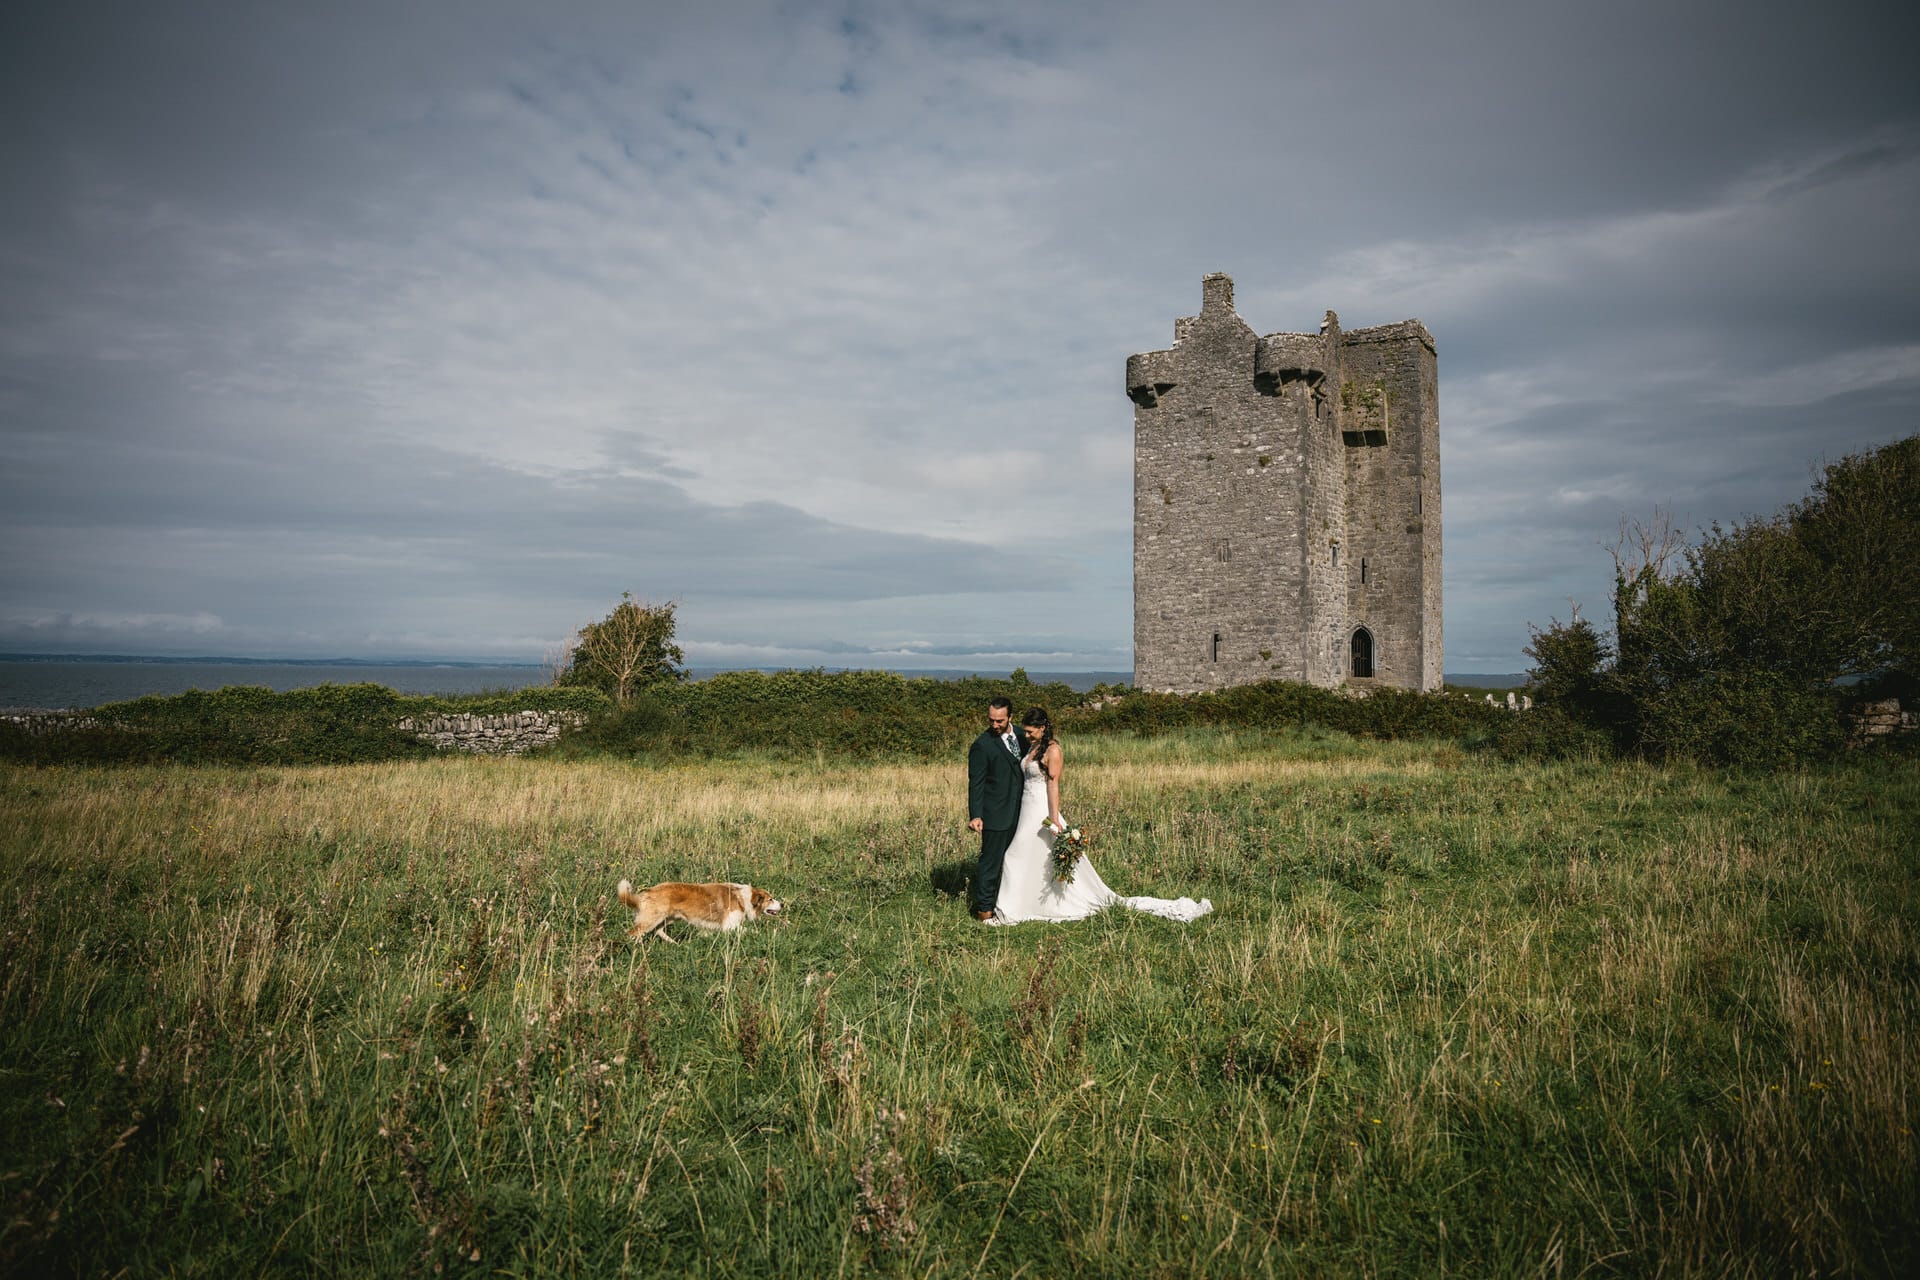 In the heart of Ireland: Capturing their love against the cliffs.